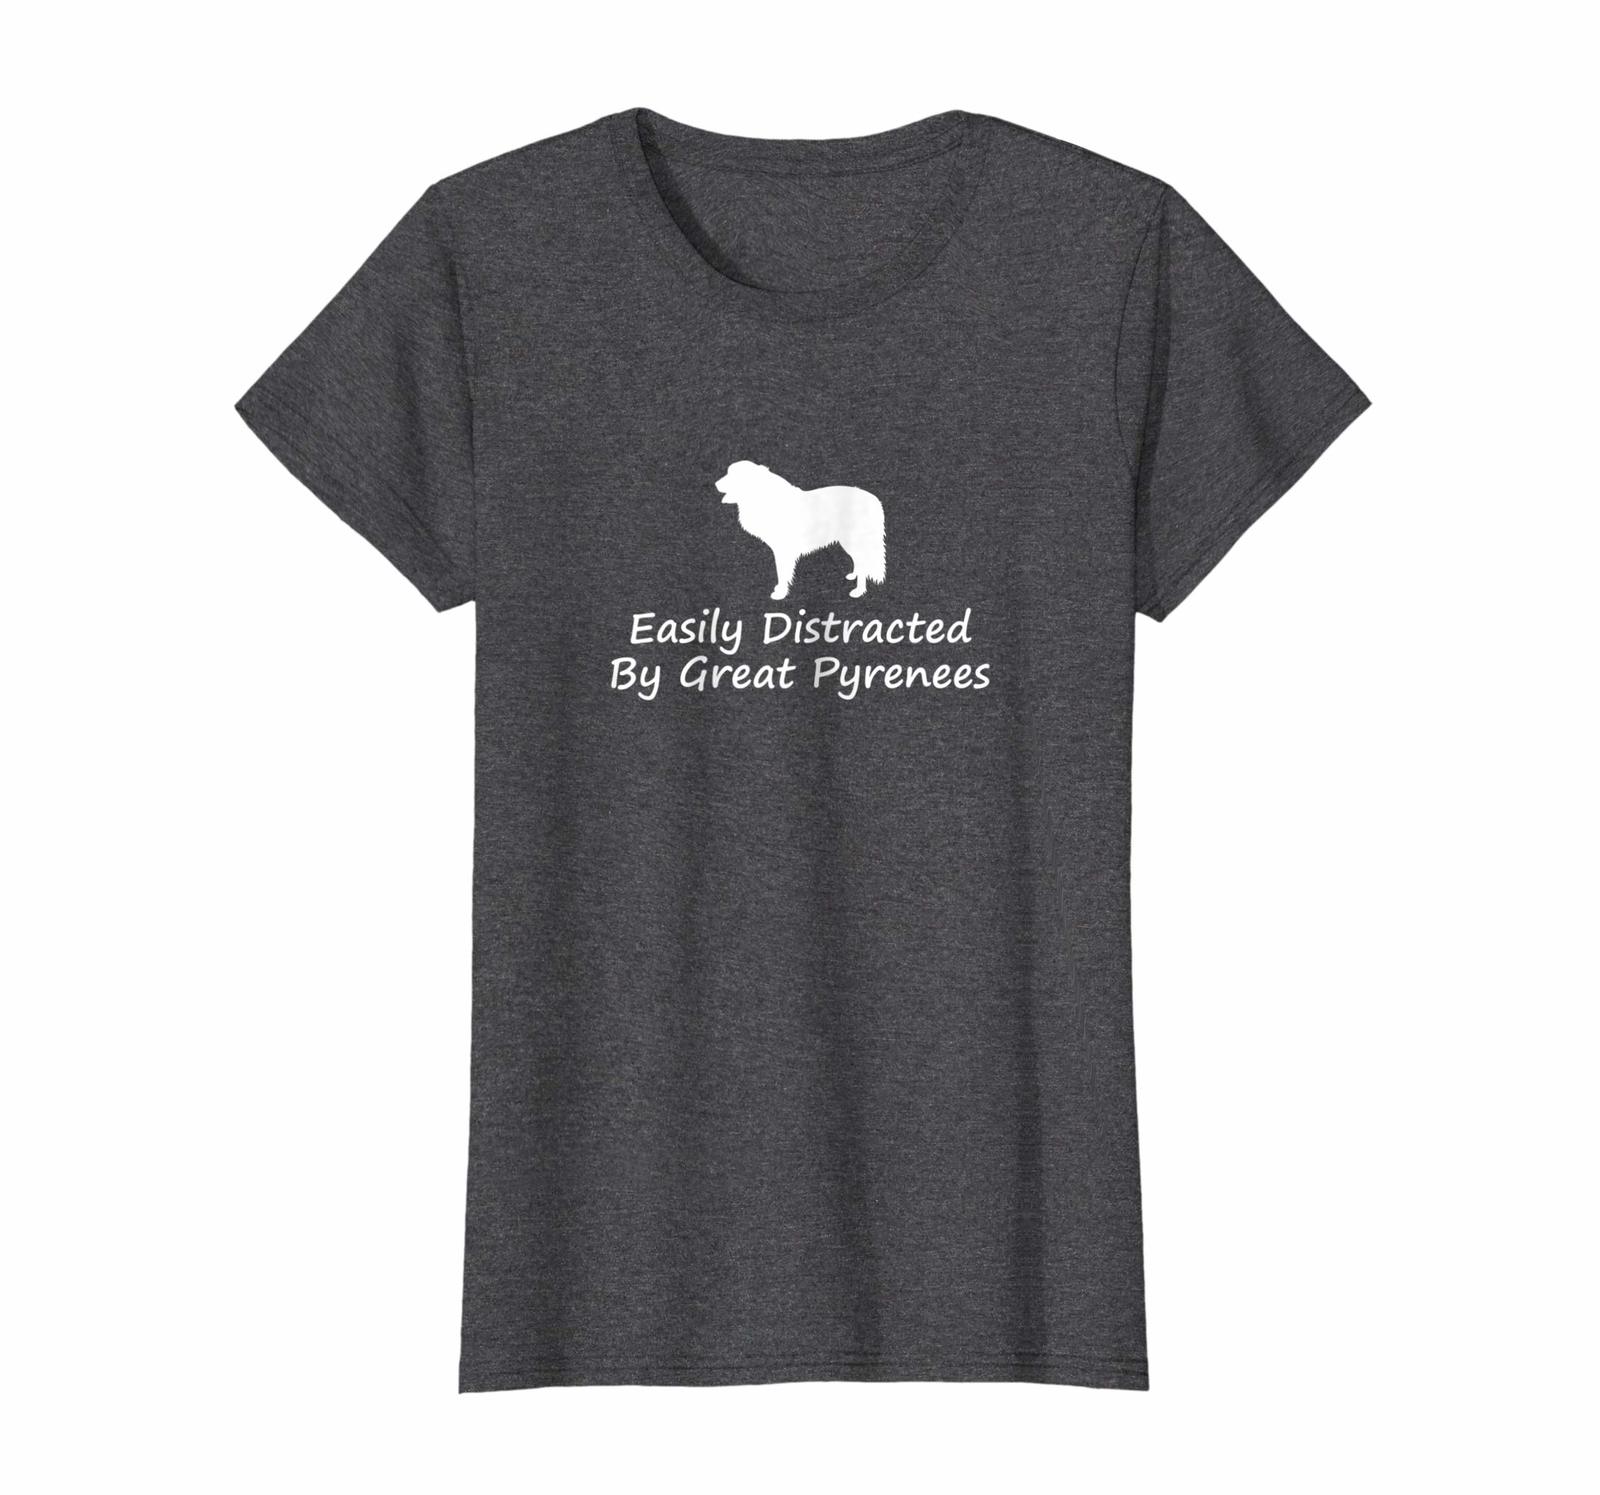 Dog Fashion - Easily Distracted By Great Pyrenees Funny Dog Lover T-Shirt Wowen